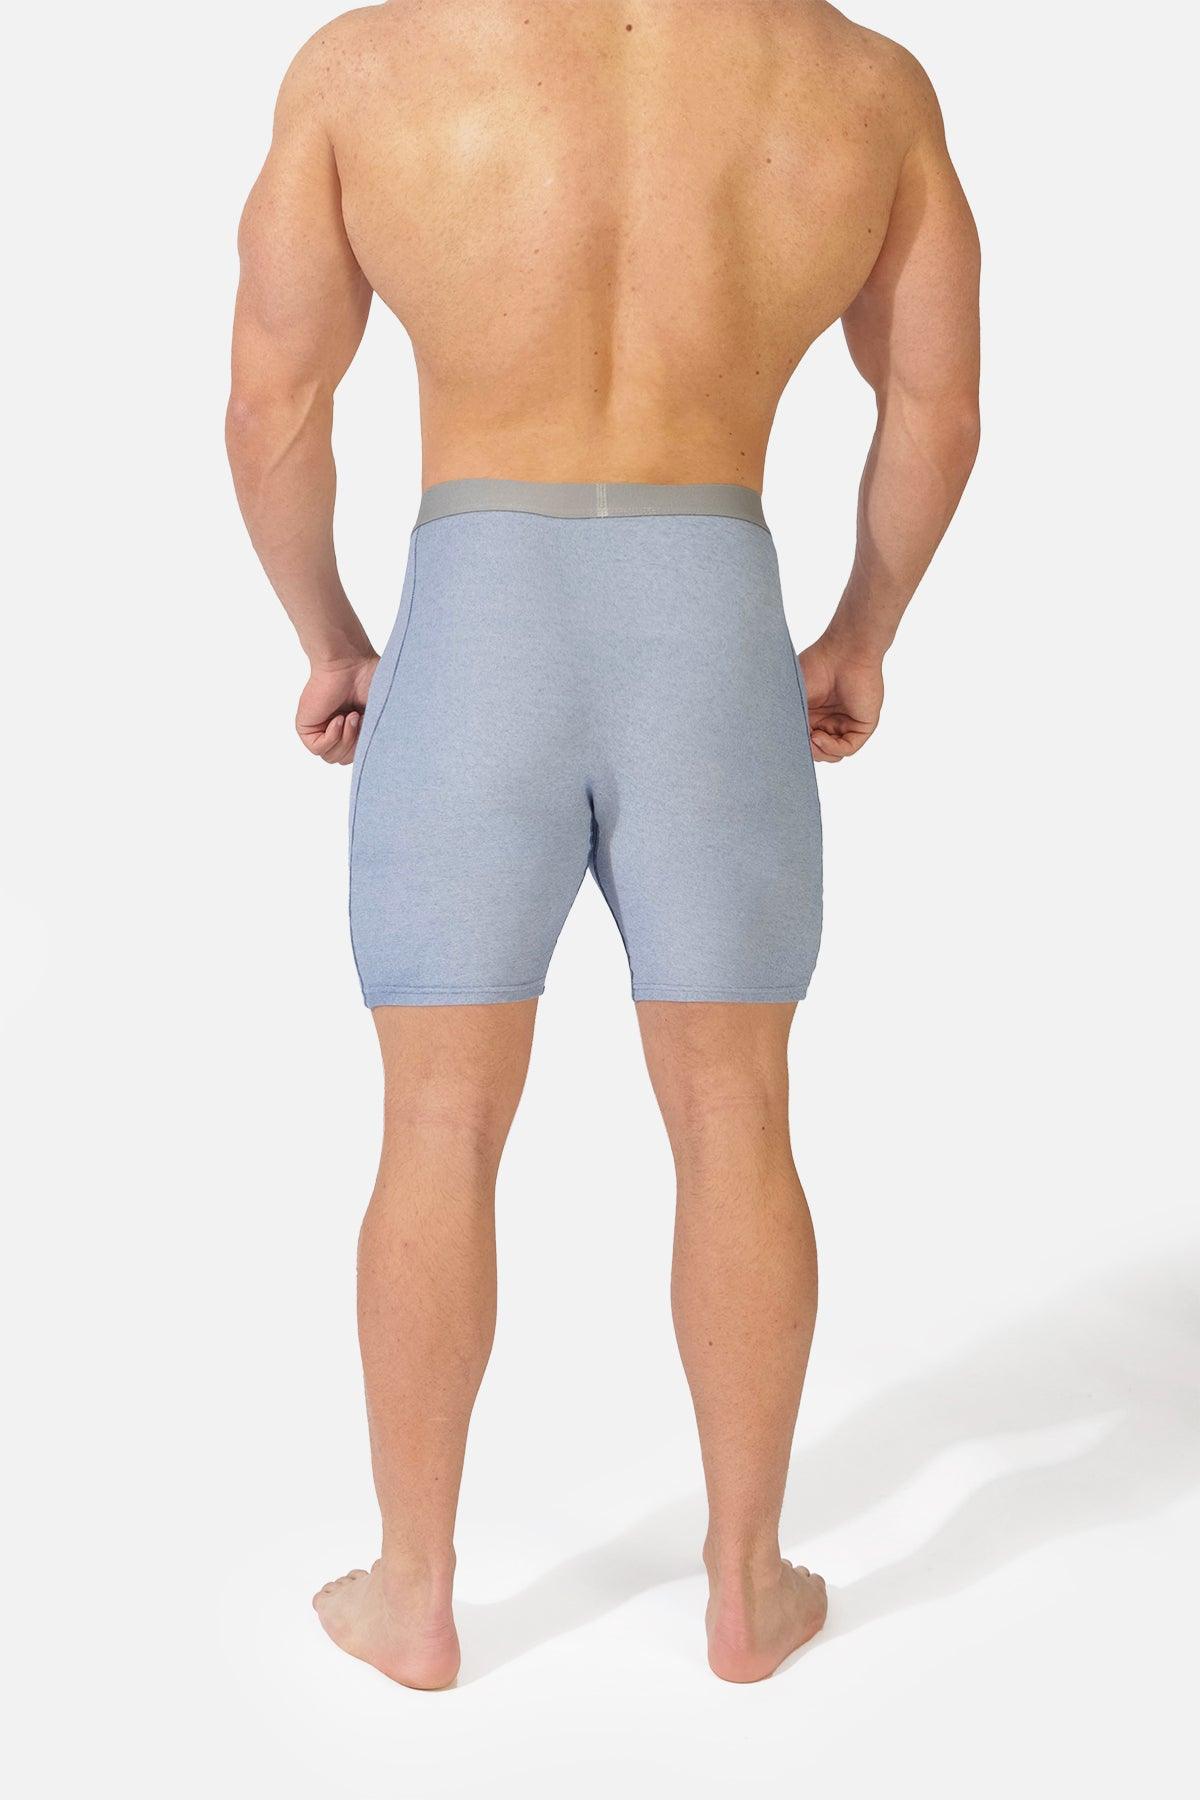 Men's Mid Length Boxer Briefs 2 Pack - Gray & Blue - Jed North